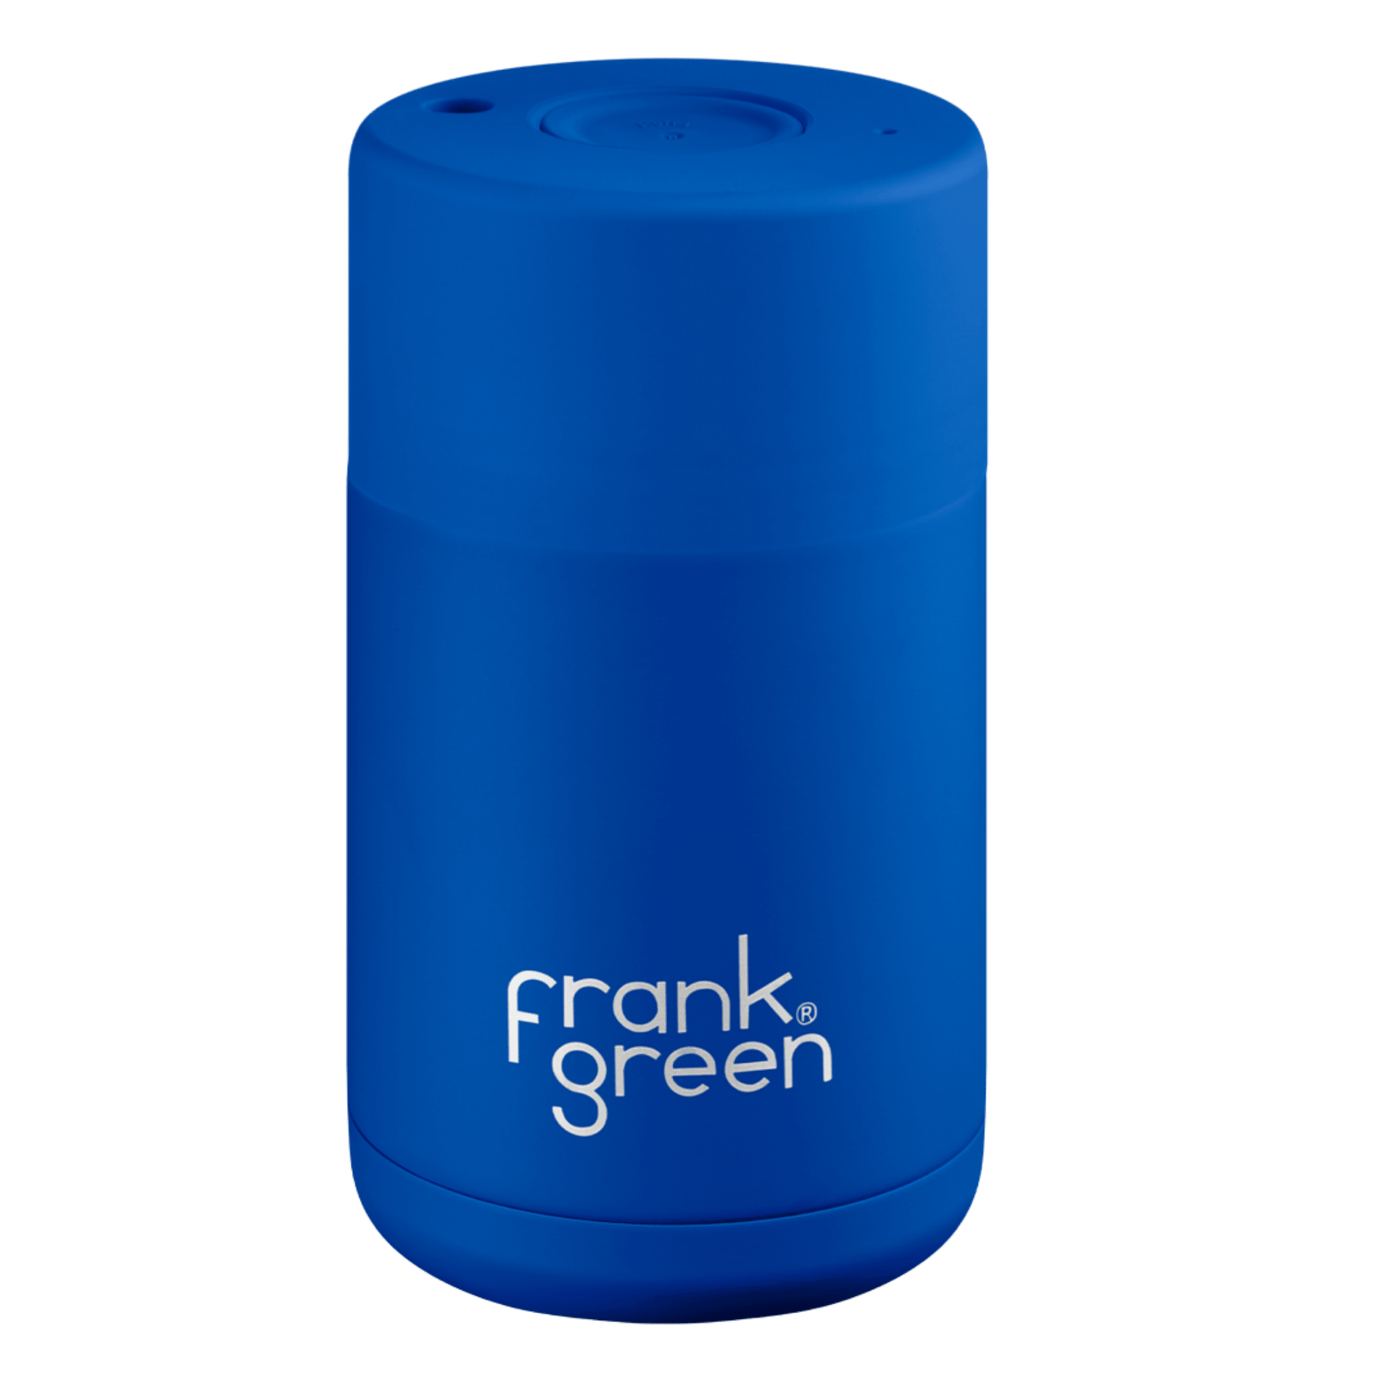 Frank Green KEEP CUP 5RYR4S3 10oz Stainless Steel Ceramic Reusable Cup with Push Button Lid | Royalty